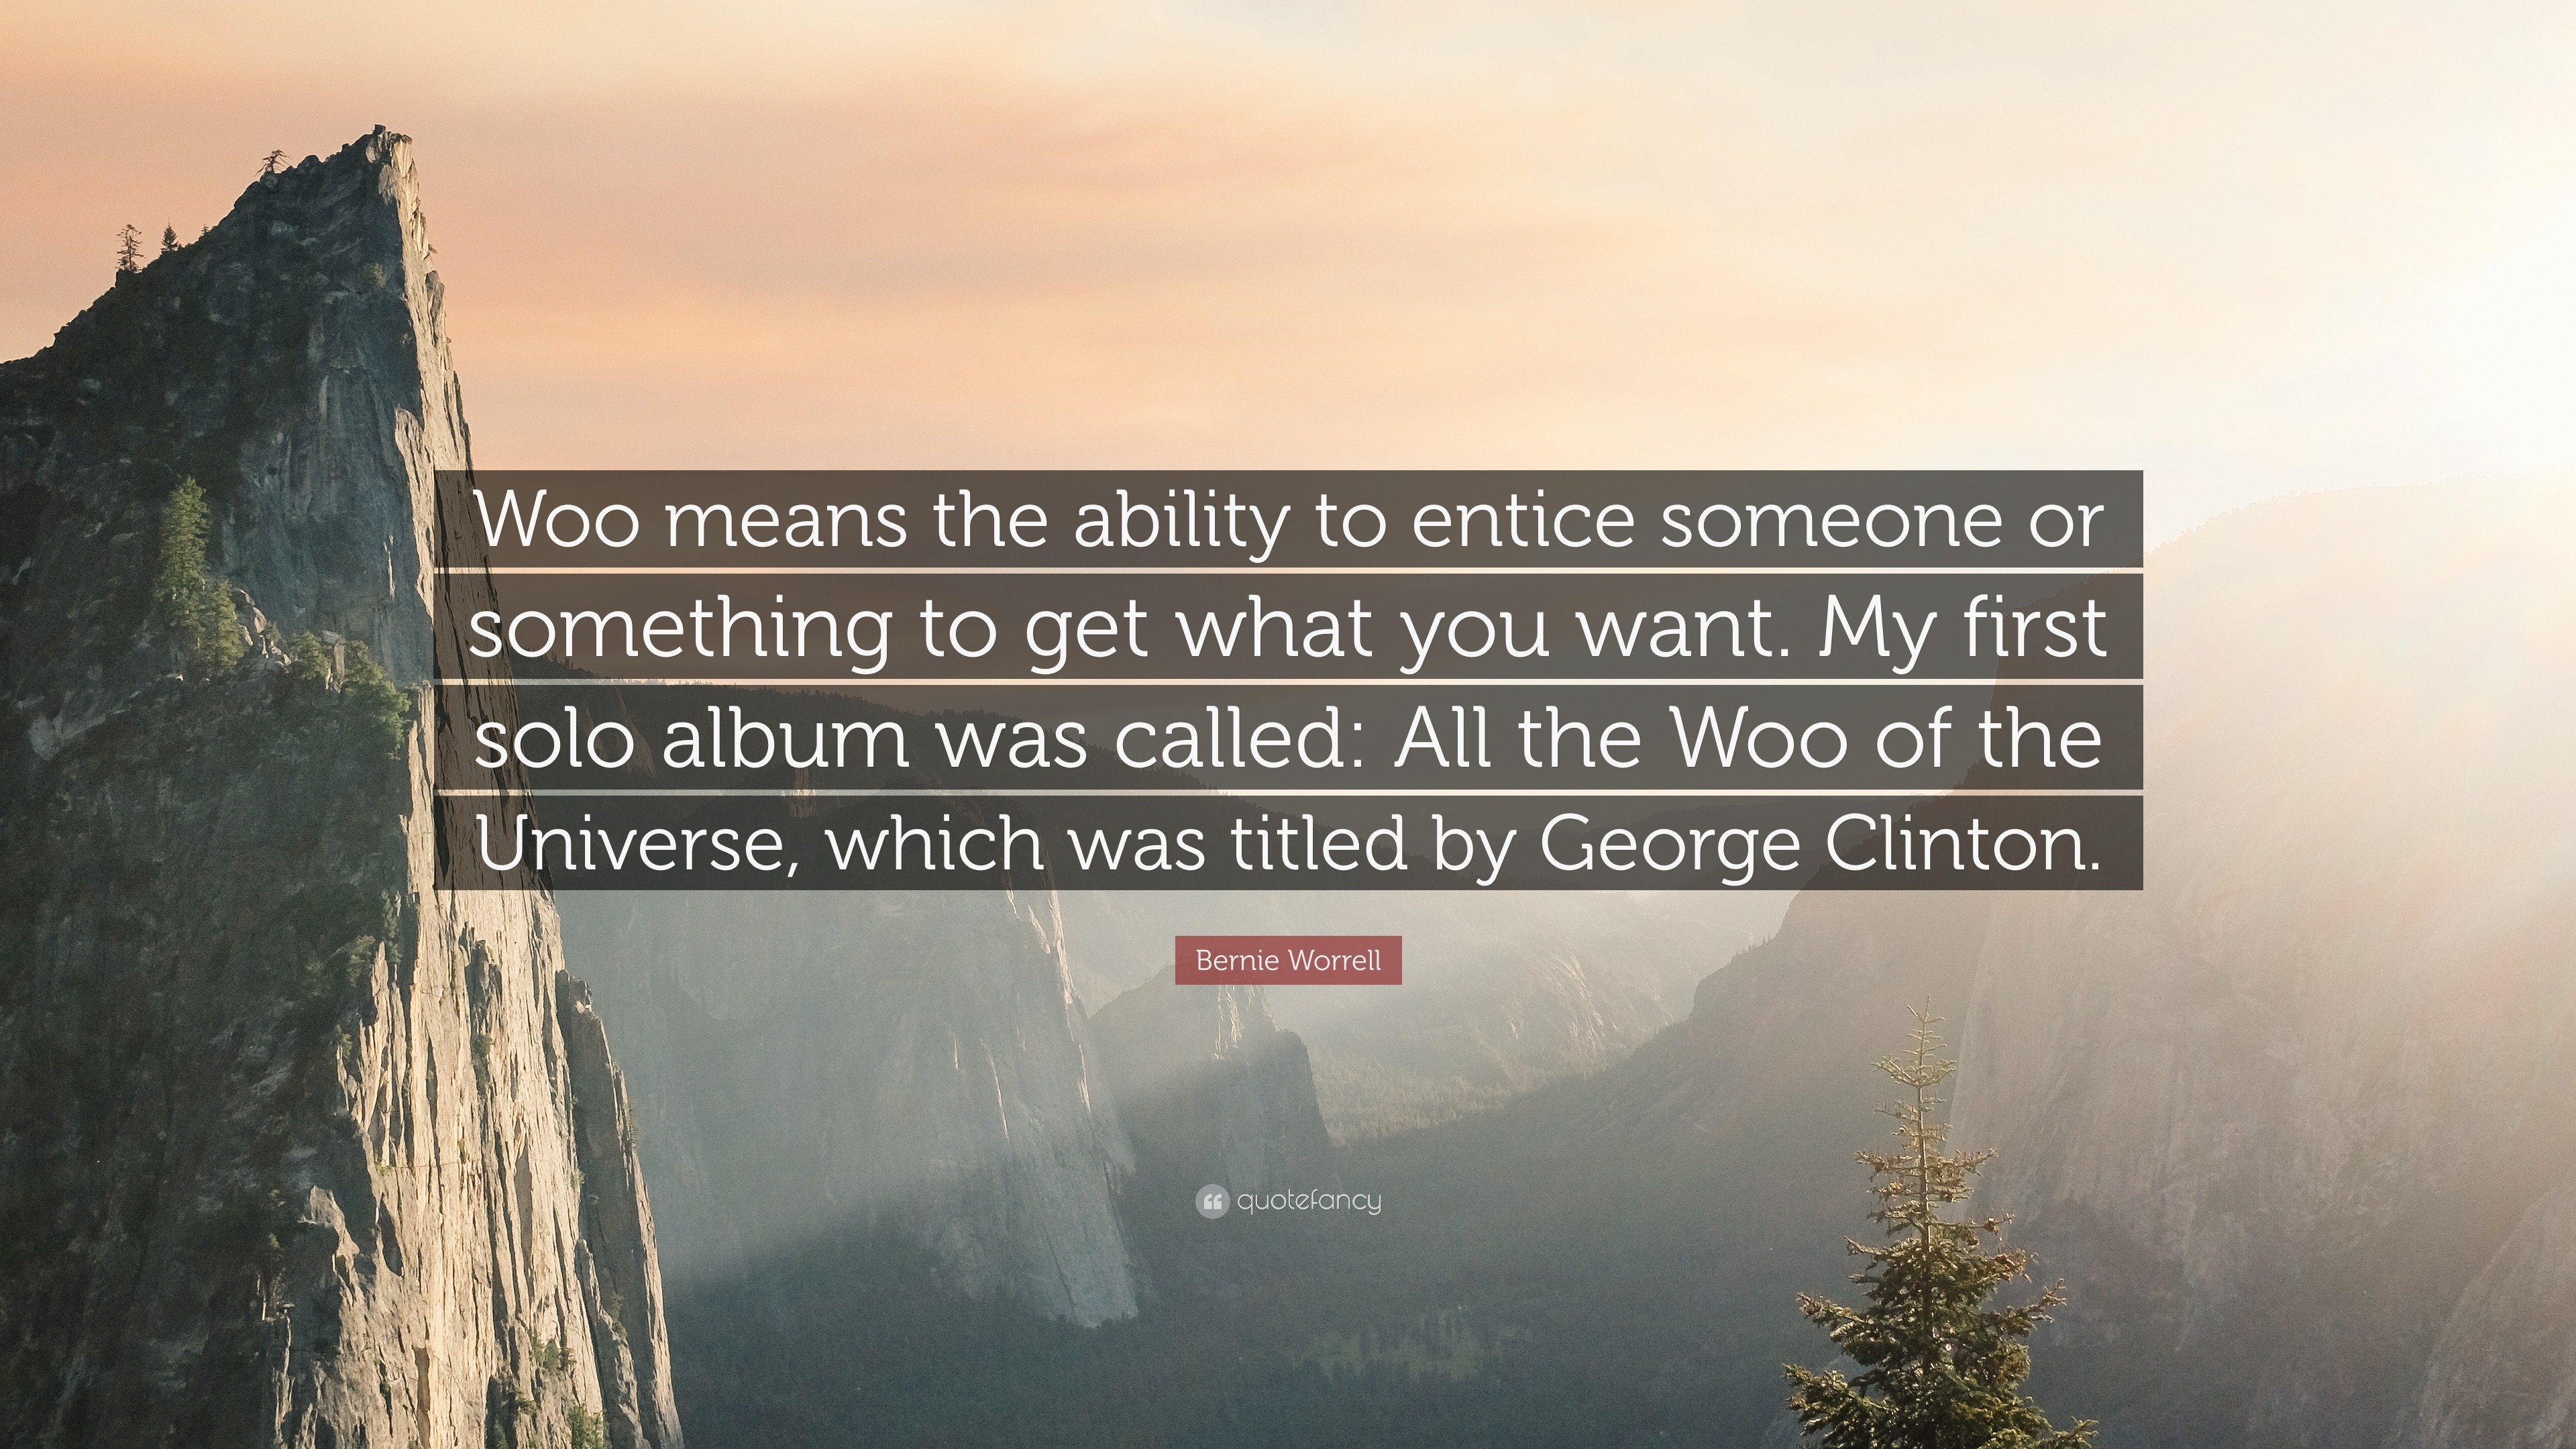 Bernie Worrell quote: Woo means the ability to entice someone or